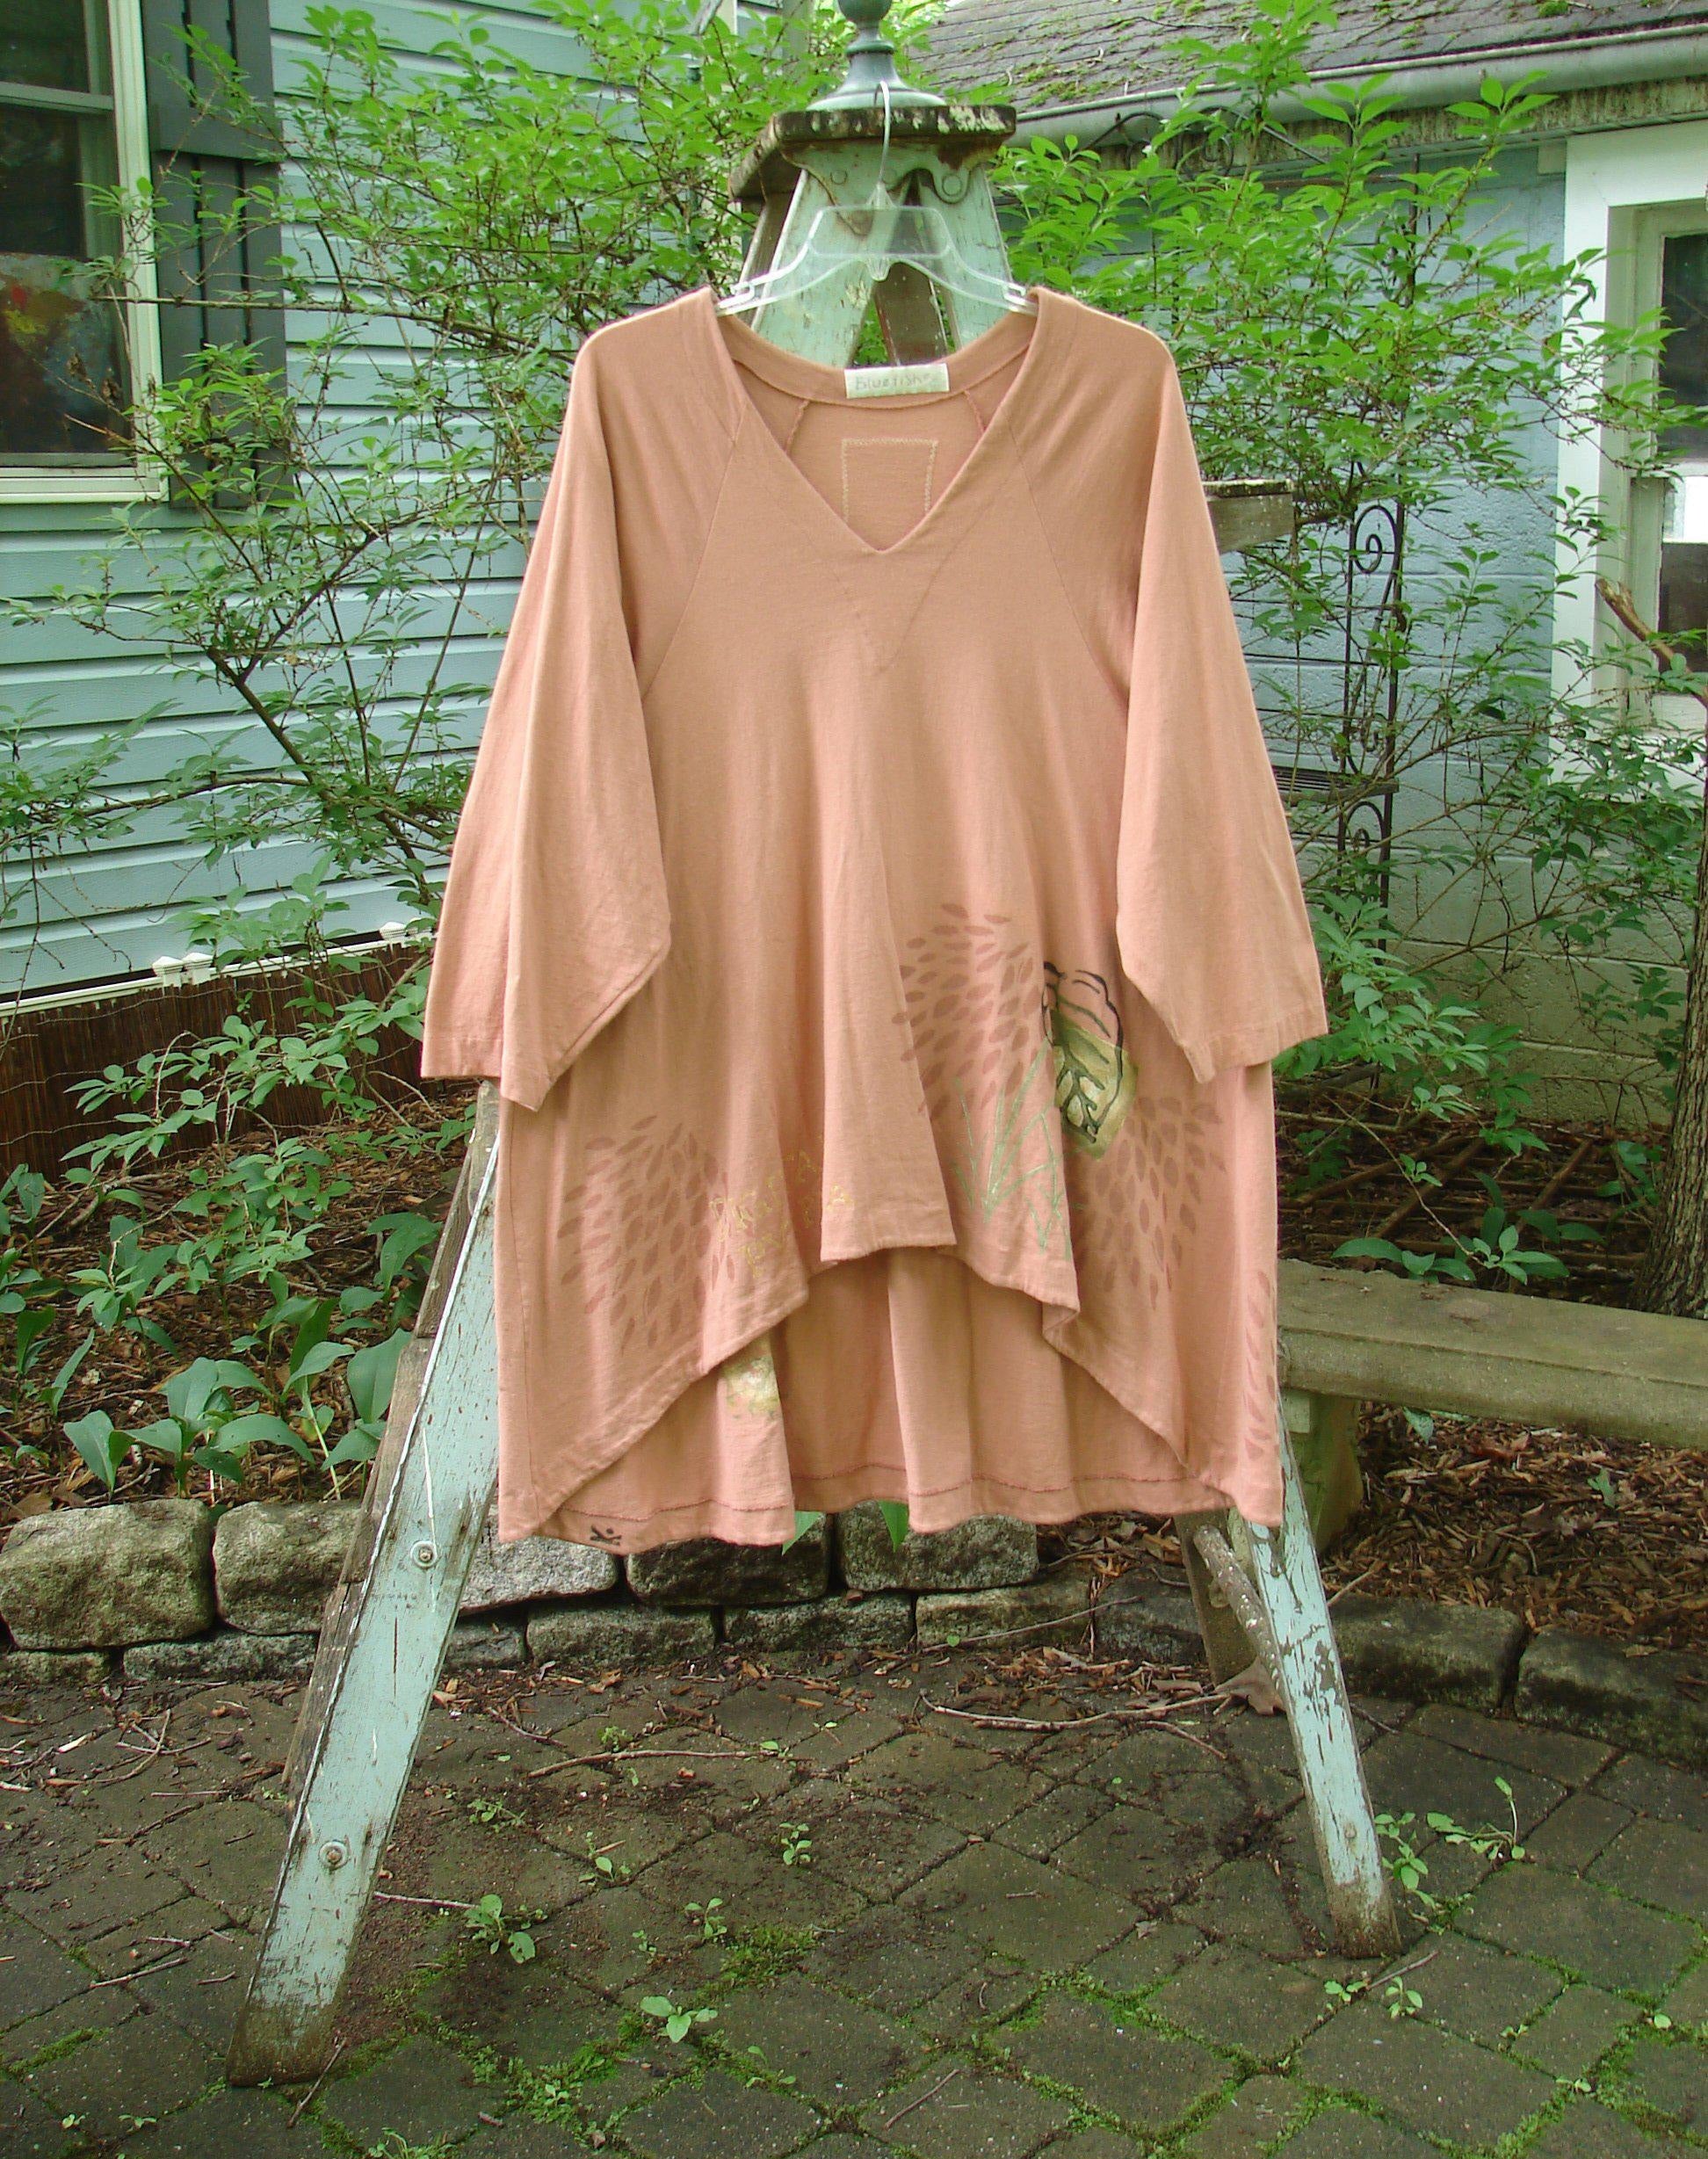 Image alt text: "1998 Botanicals Bell Flower Top Magnolia Size 2: A pink shirt on a clothes rack, featuring a belled A-line shape, sectional panels, and a Blue Fish Signature Patch. Perfect condition, made from organic cotton."

Note: The alt text has been modified to fit within the character limit and to align with the provided product description and store context.